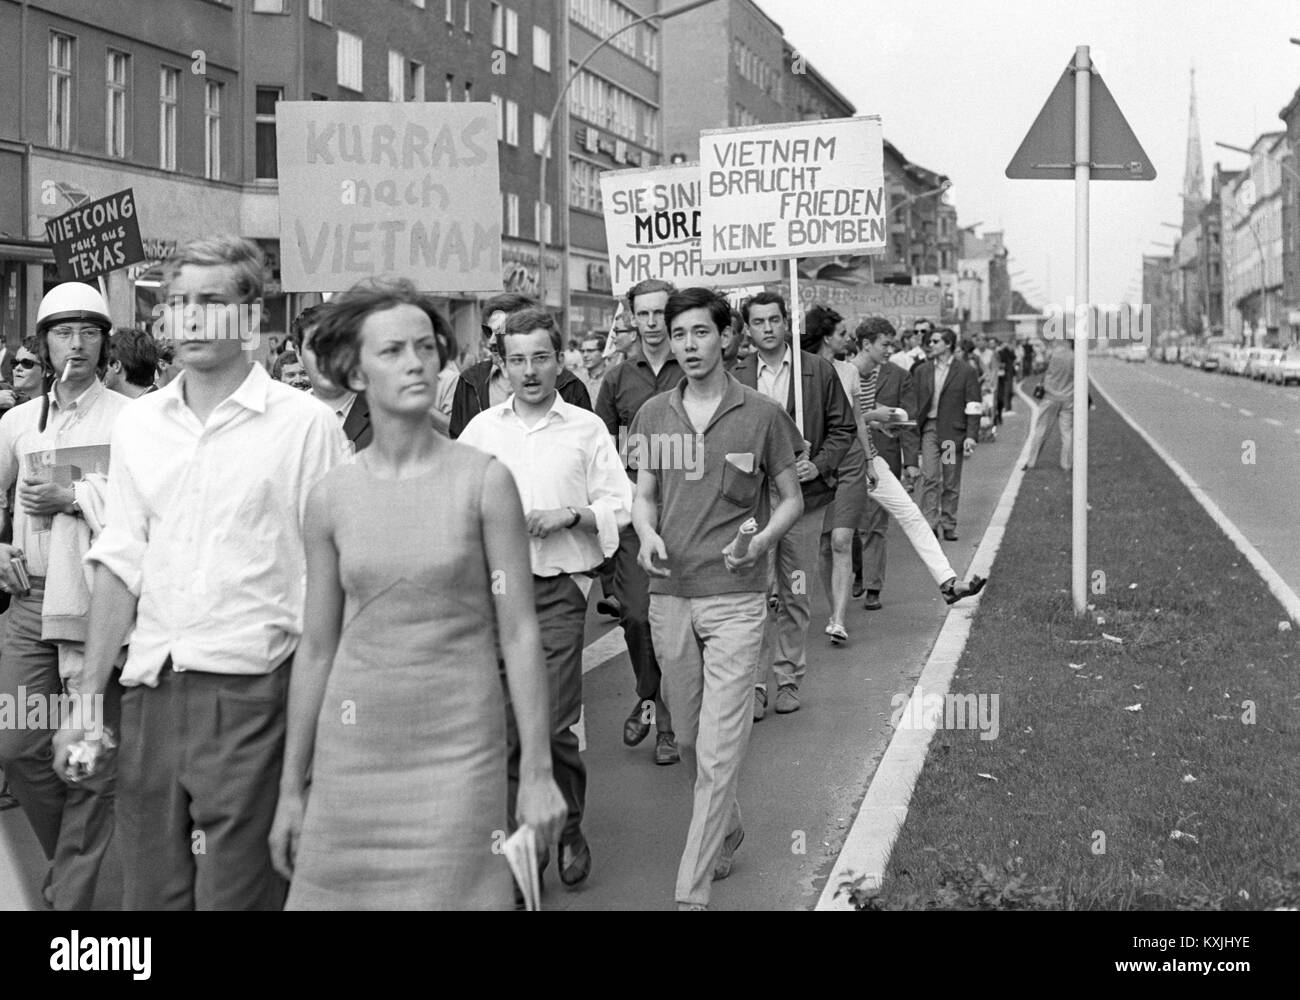 About 1,000 young people participate in a Vietnam demonstration organised by the Socialist Youth Germany 'Die Falken' on 26 June 1967. | usage worldwide Stock Photo